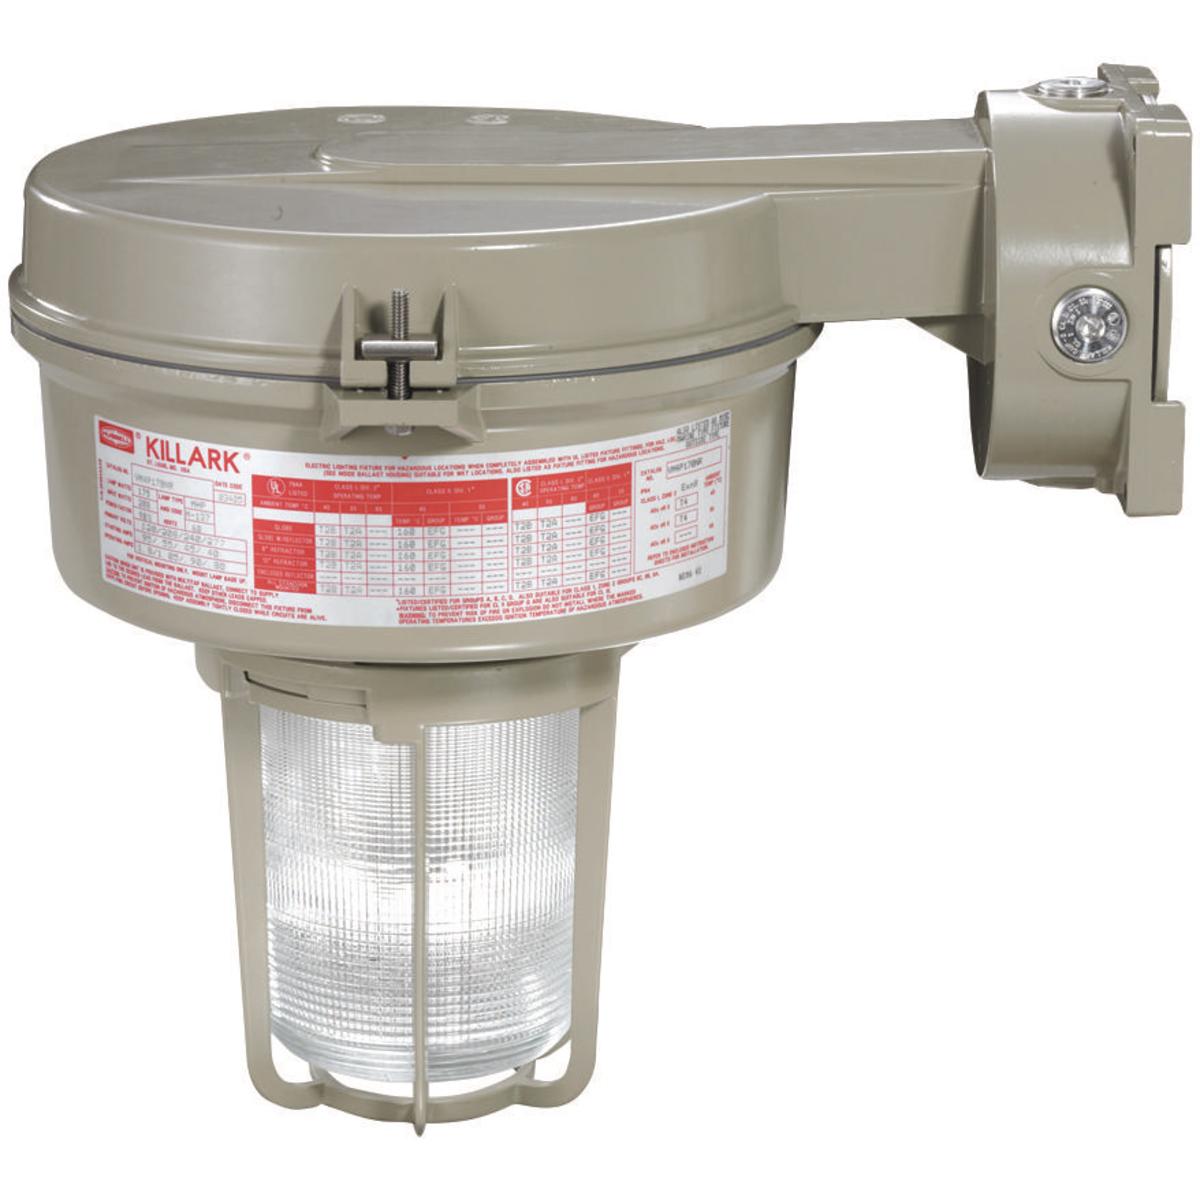 Hubbell VM3P155B2R5G VM3 Series - 150W Metal Halide 480V - 3/4" Wall Mount - Type V Glass Refractor and Guard  ; Ballast tank and splice box – corrosion resistant copper-free aluminum alloy with baked powder epoxy/polyester finish, electrostatically applied for complete, unif